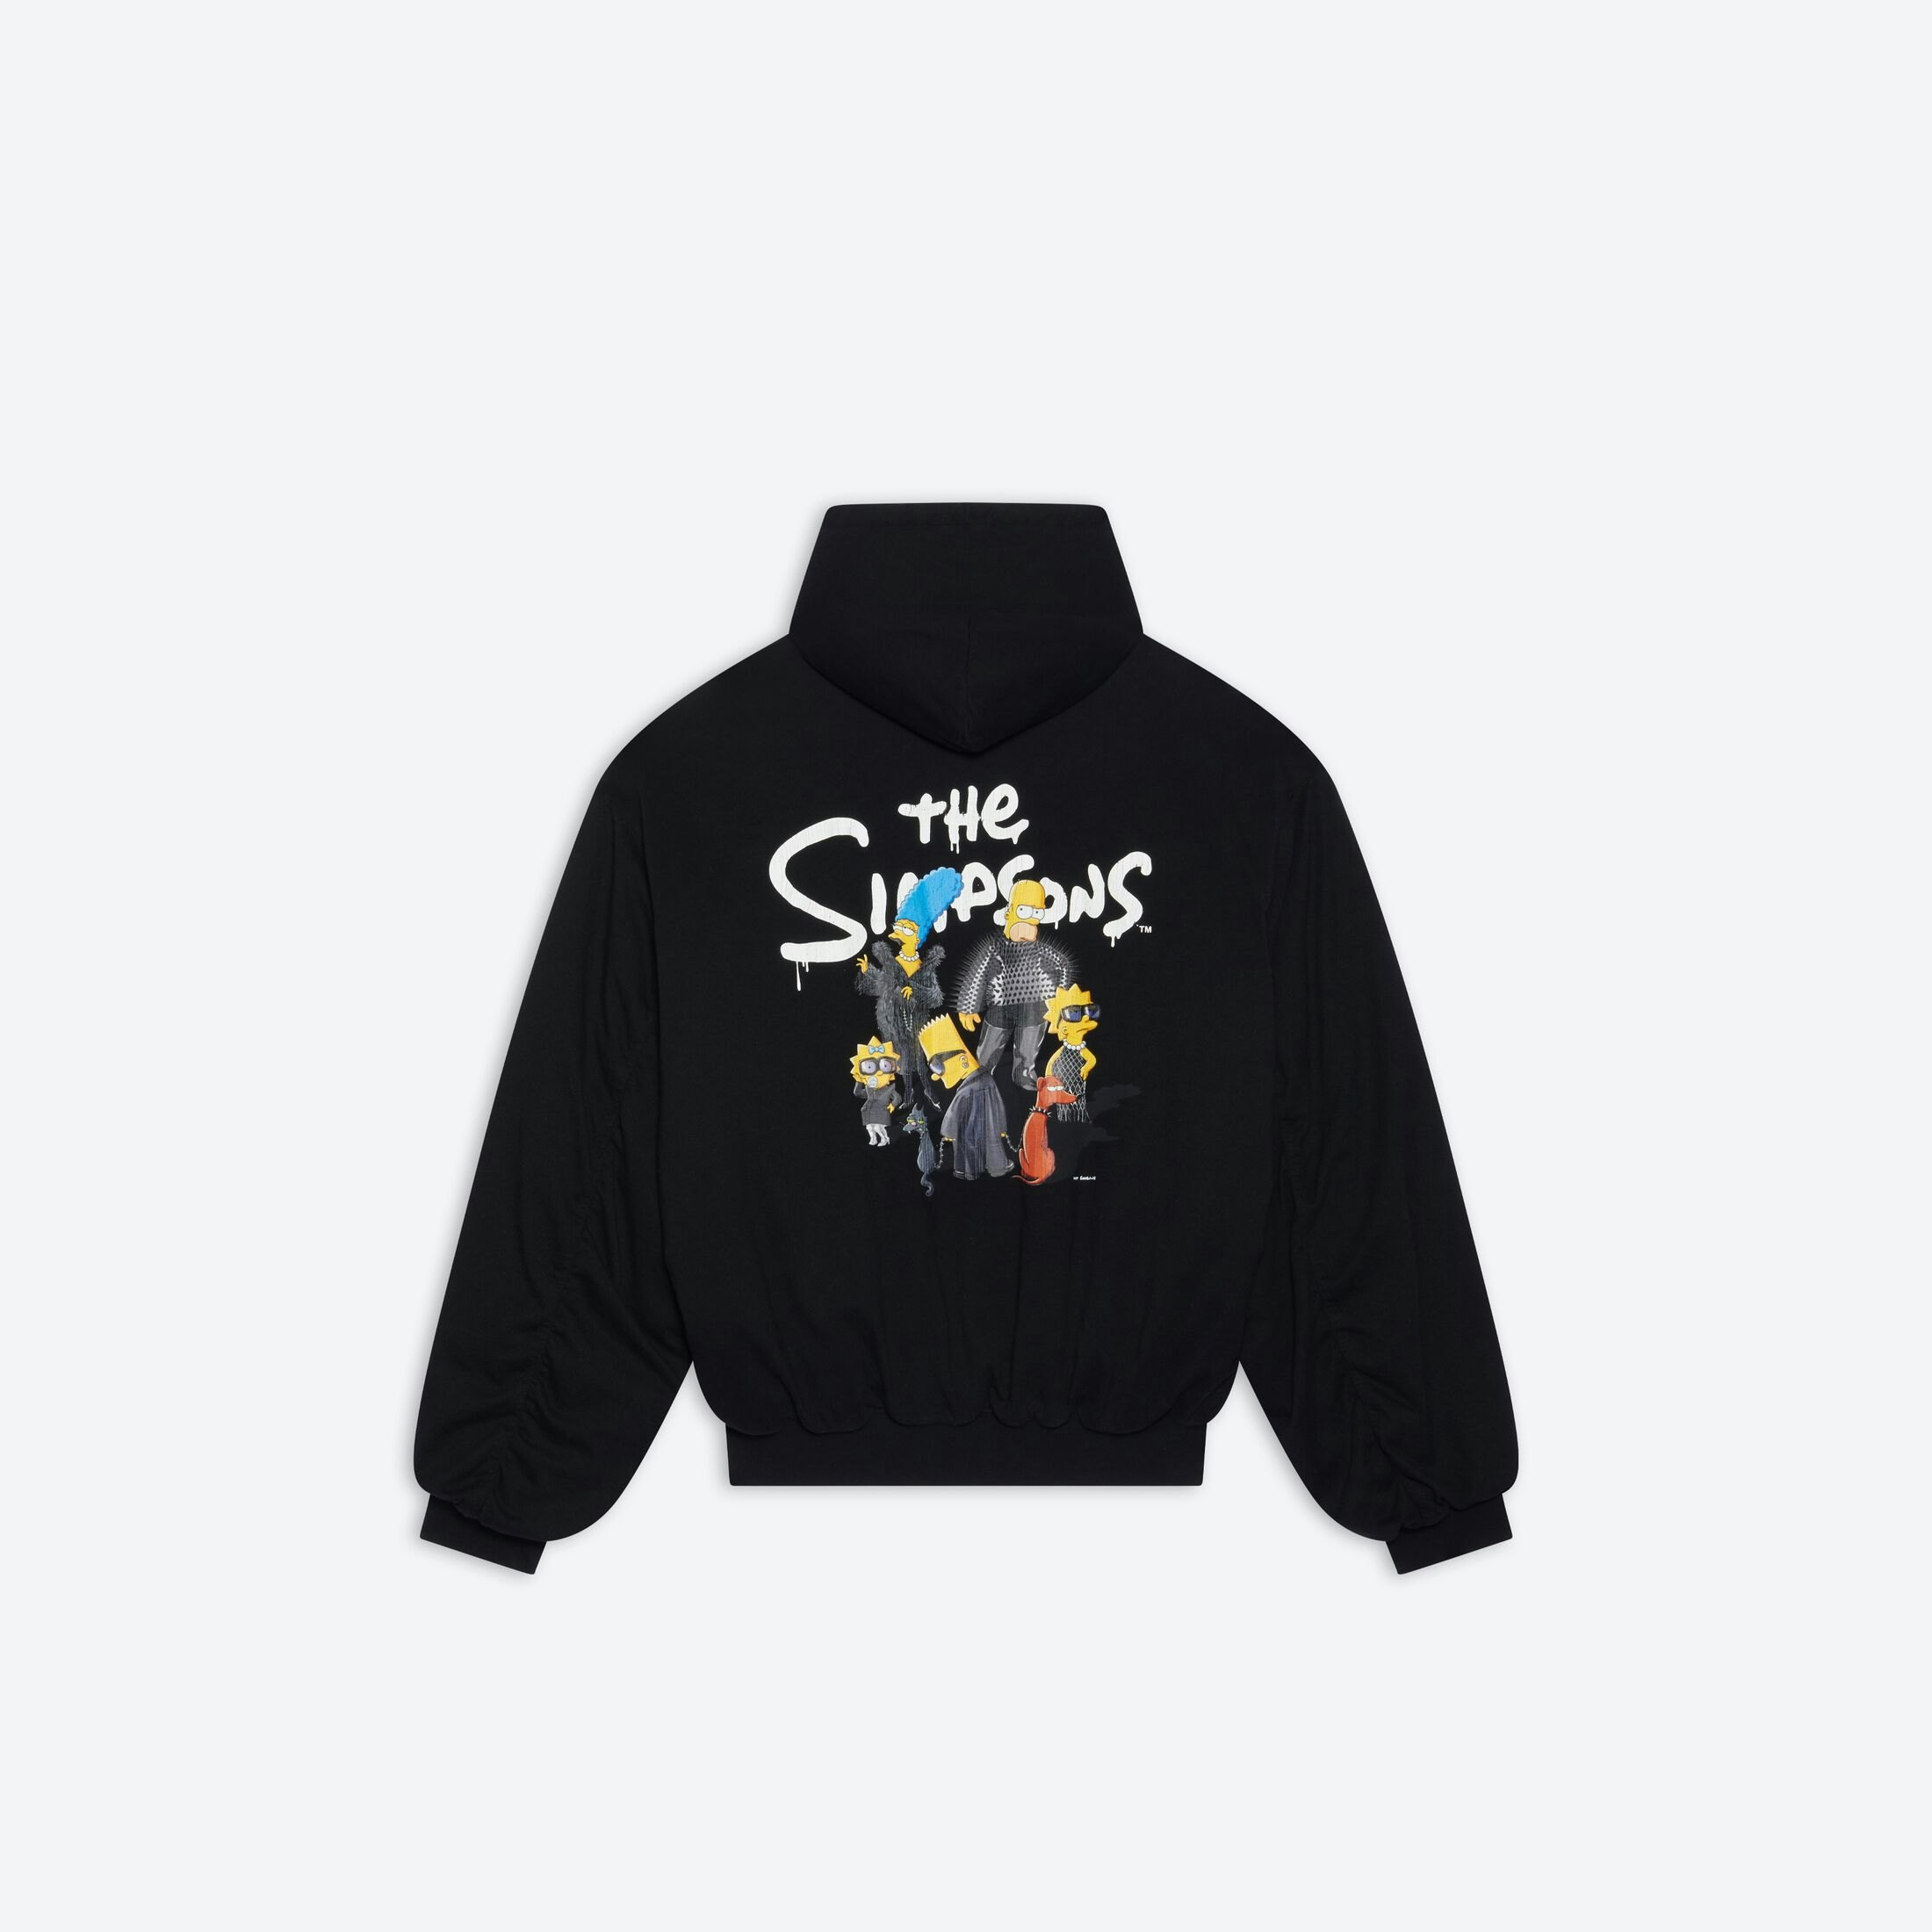 The Simpsons cotton hoodie